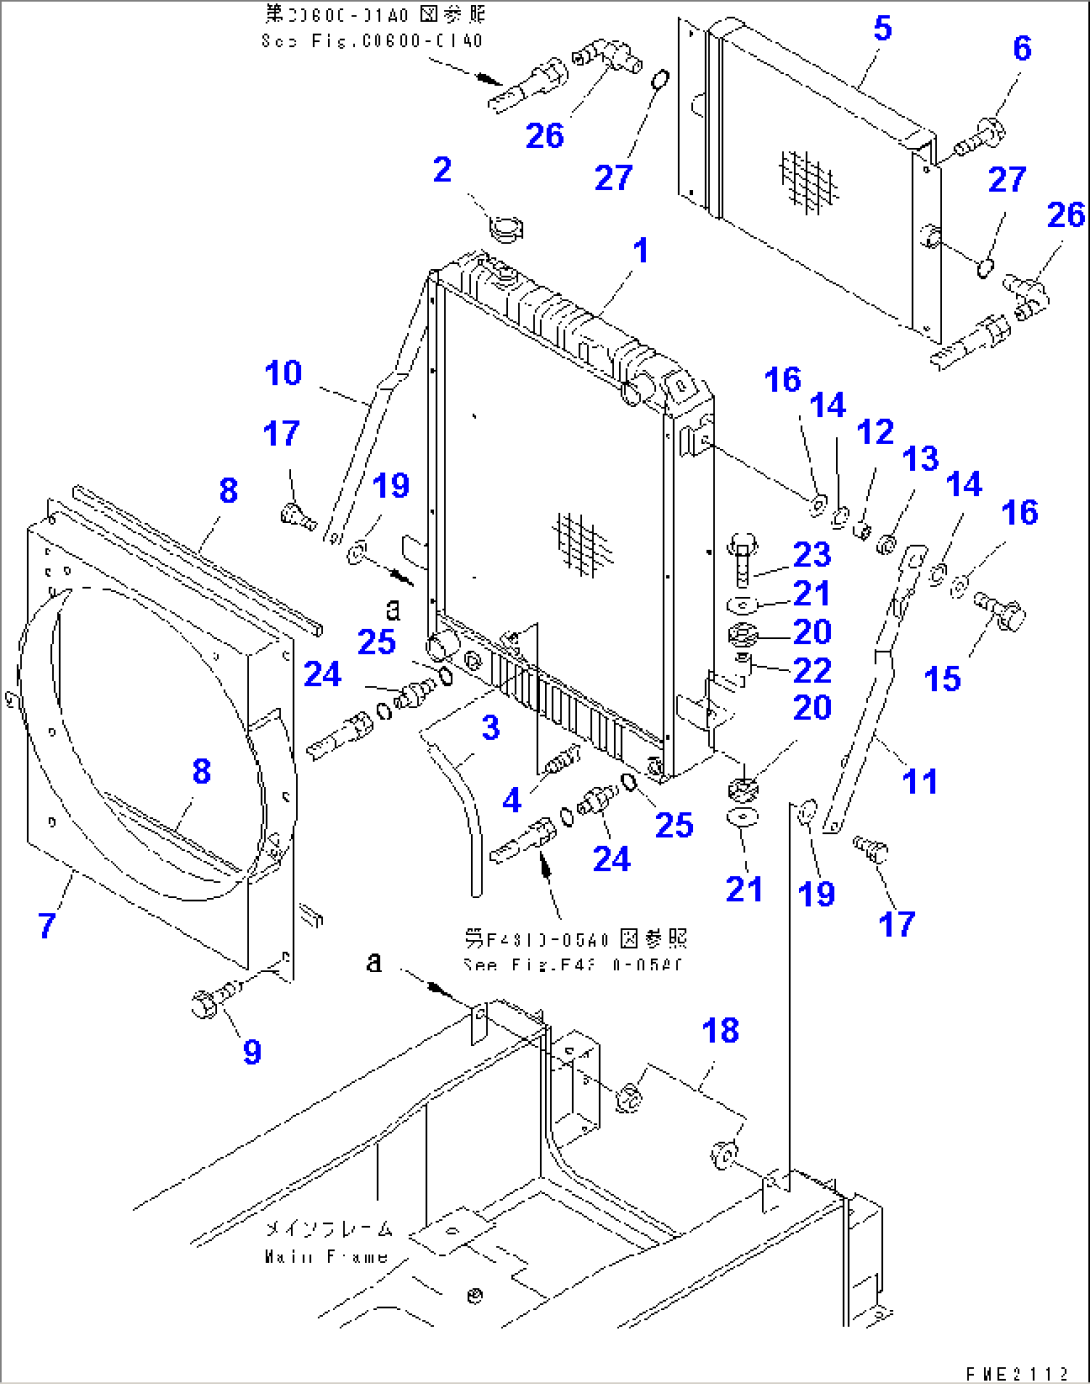 RADIATOR AND MOUNTING PARTS(#10001-10300)